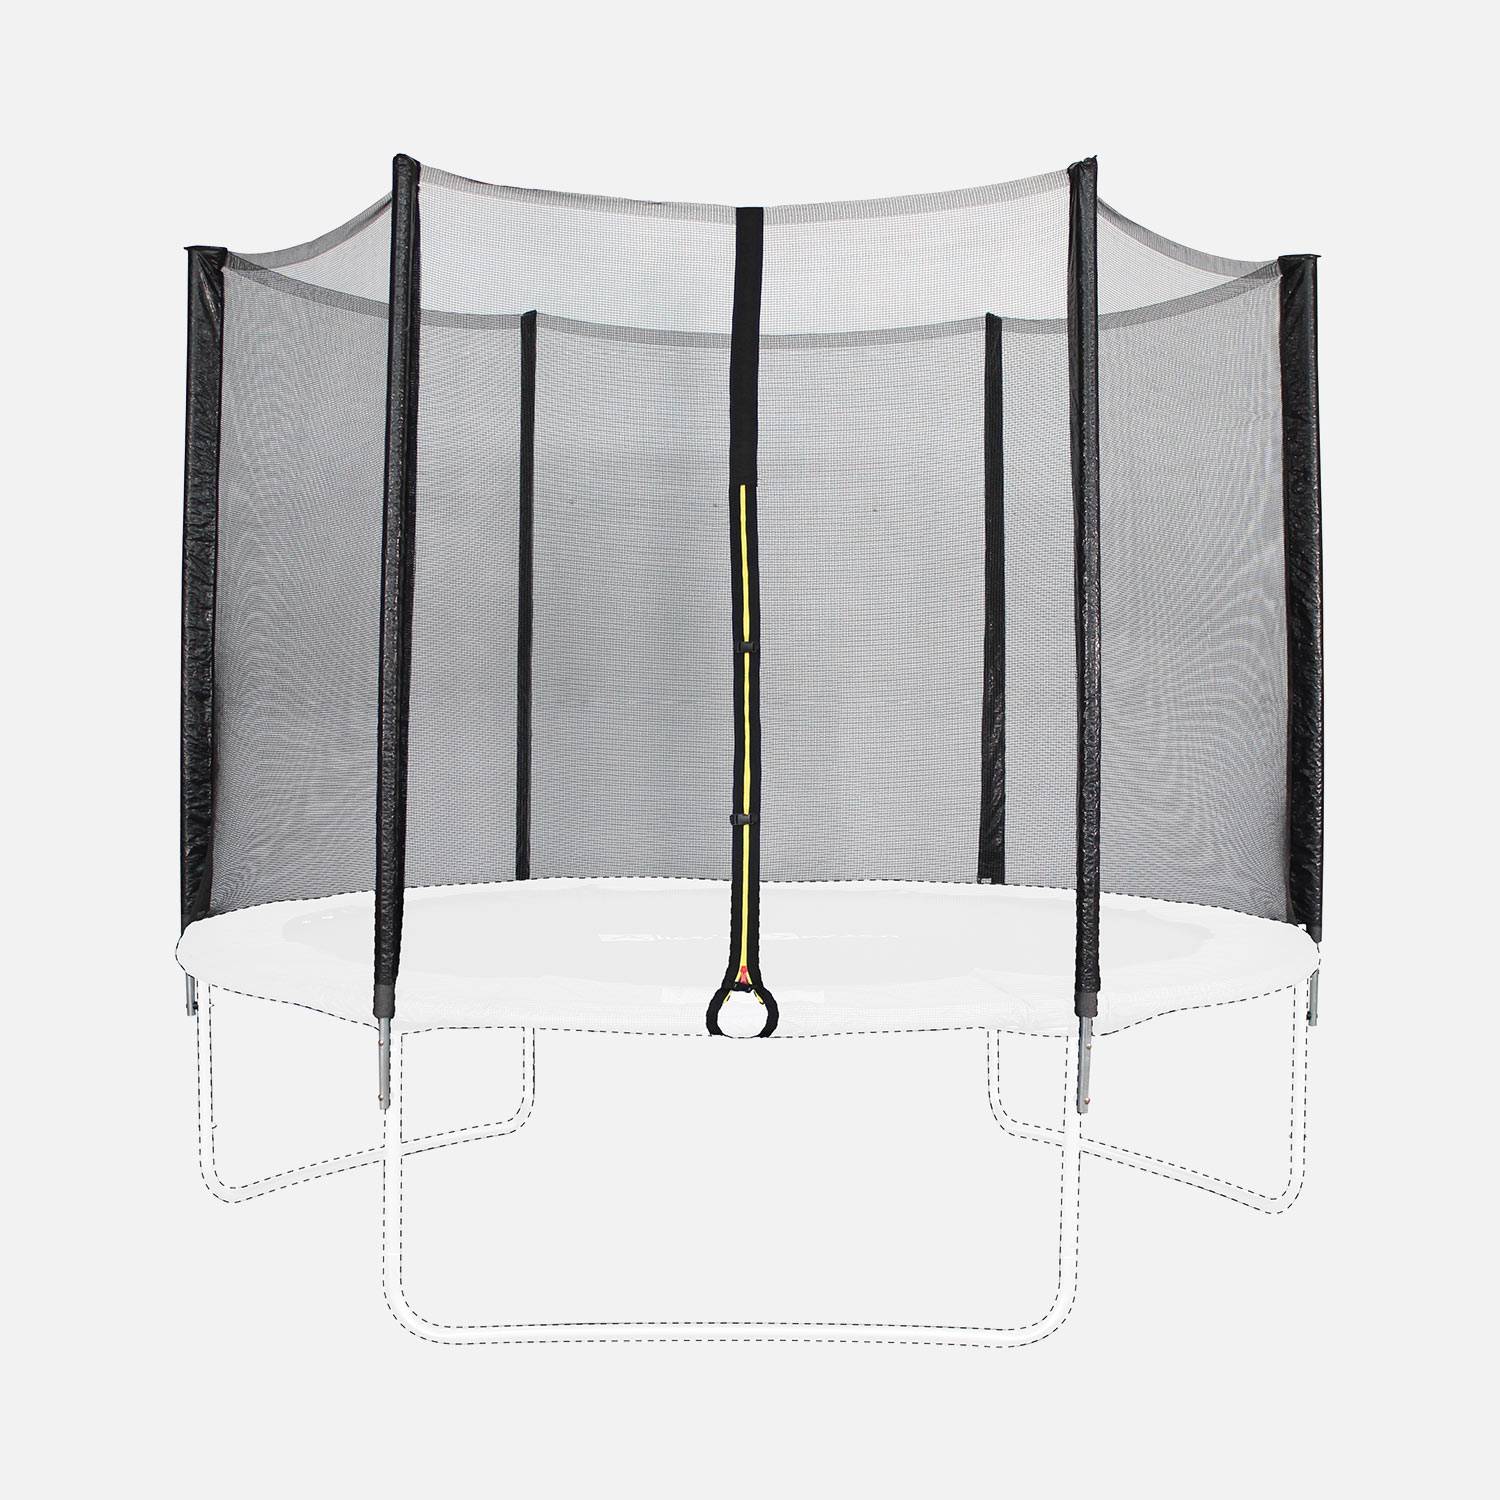 Trampoline protection net replacement kit, ANTARES OUTER, for Mars trampoline Ø305cm Photo2